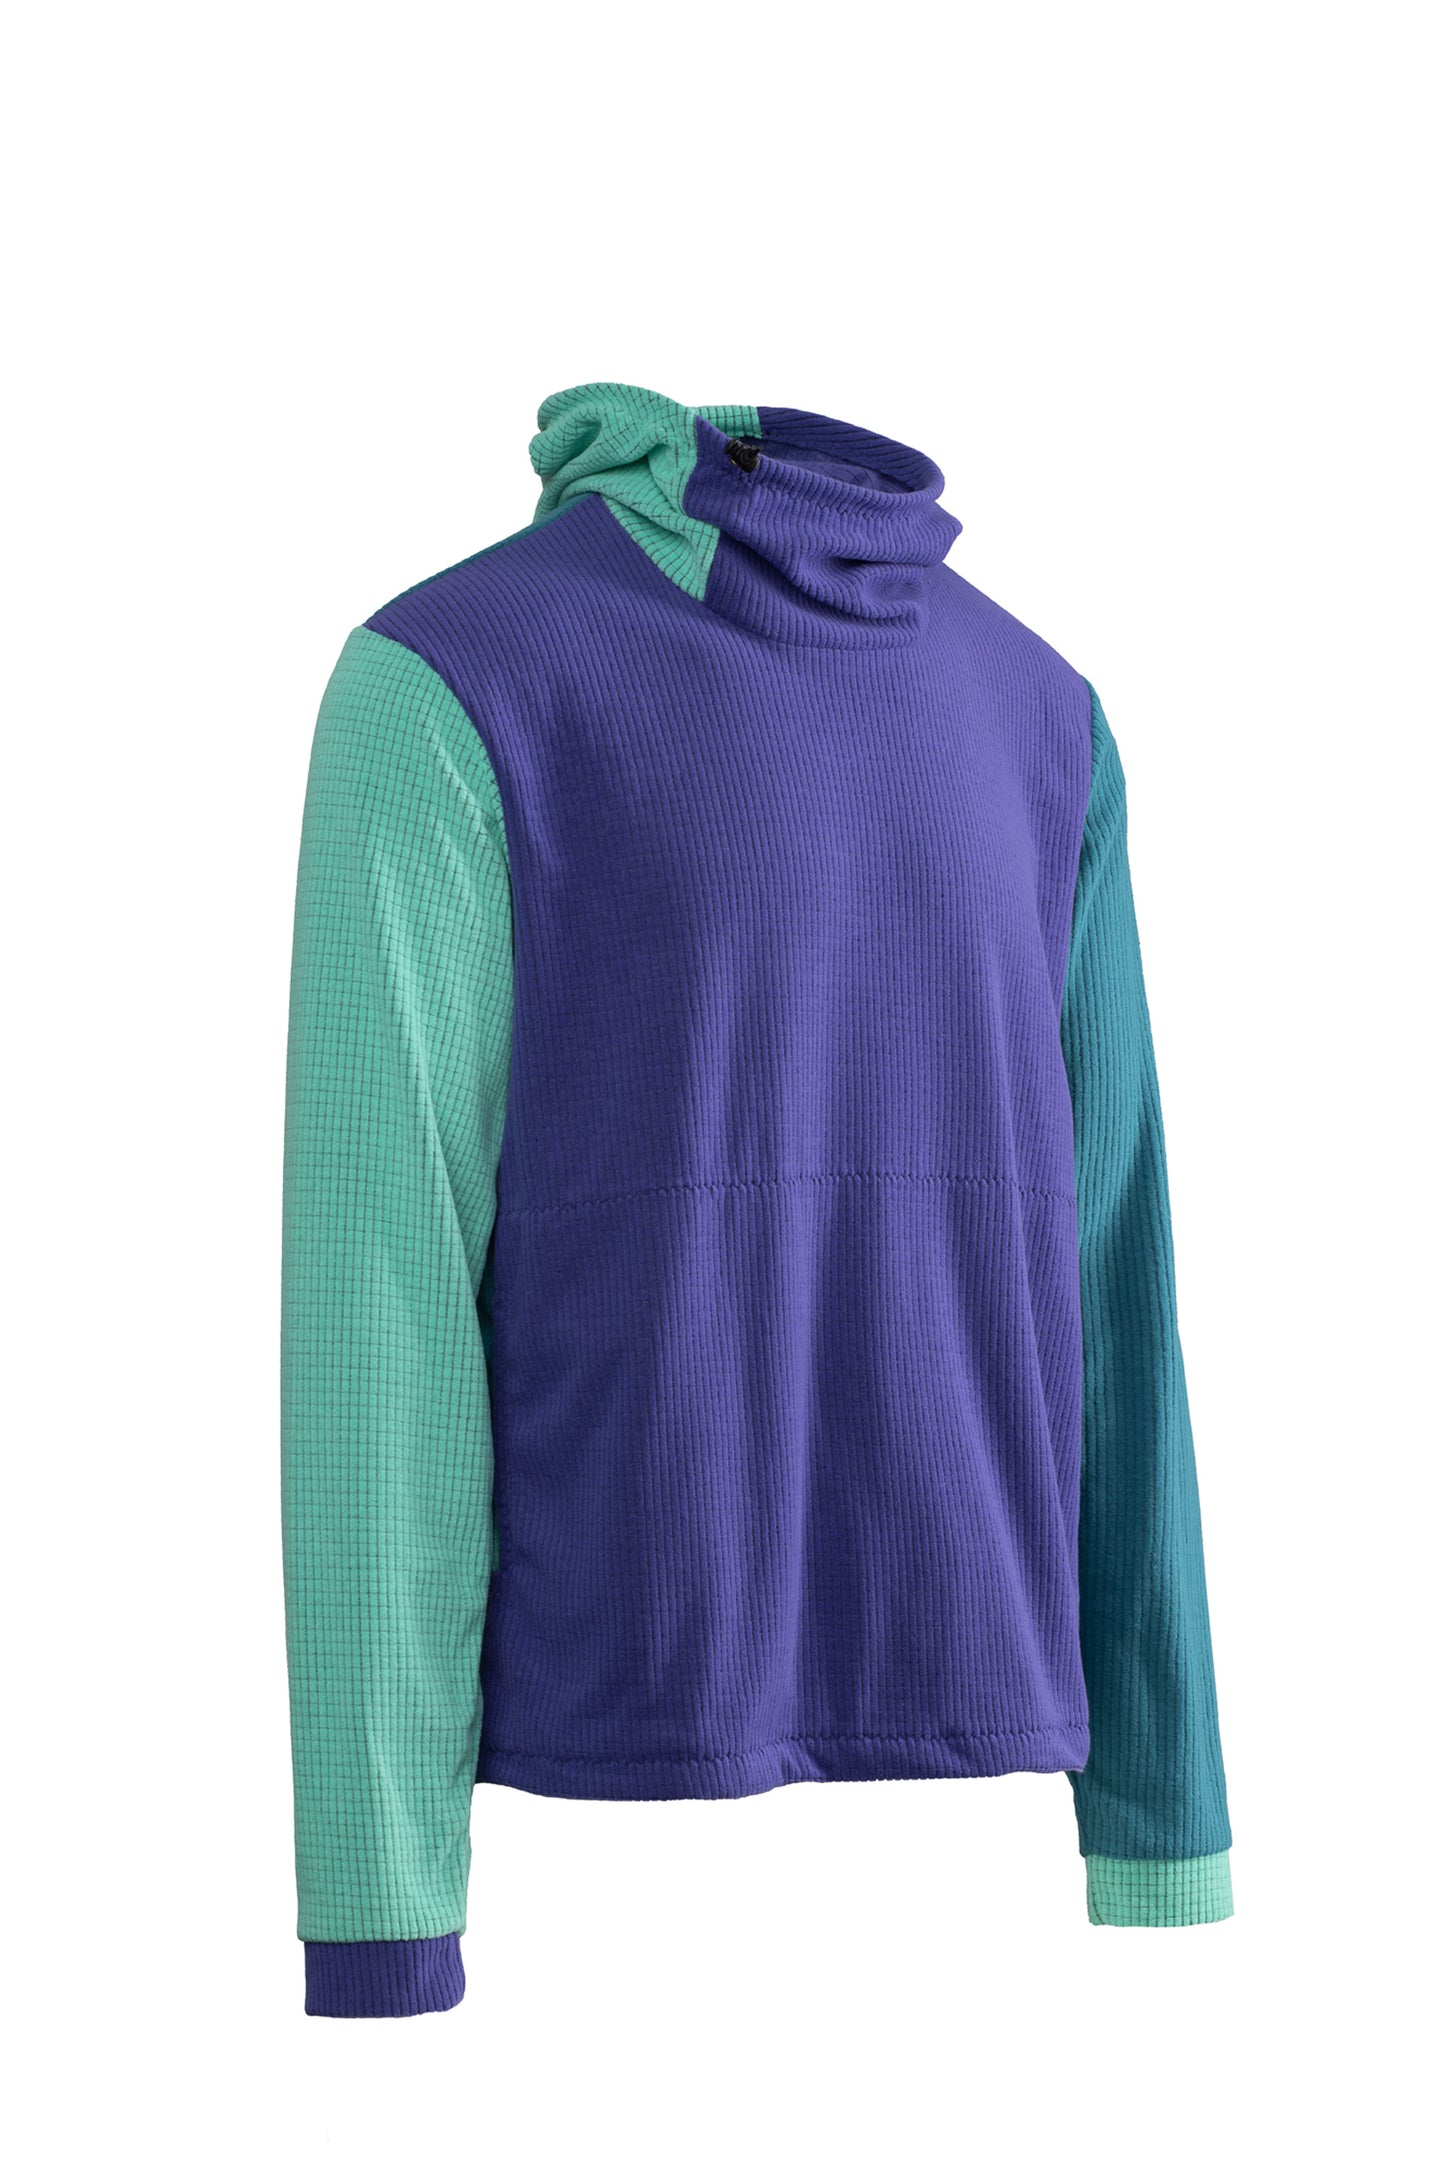 Small Batch Series #2: Solid Sleeved Violet/Teal/Mint